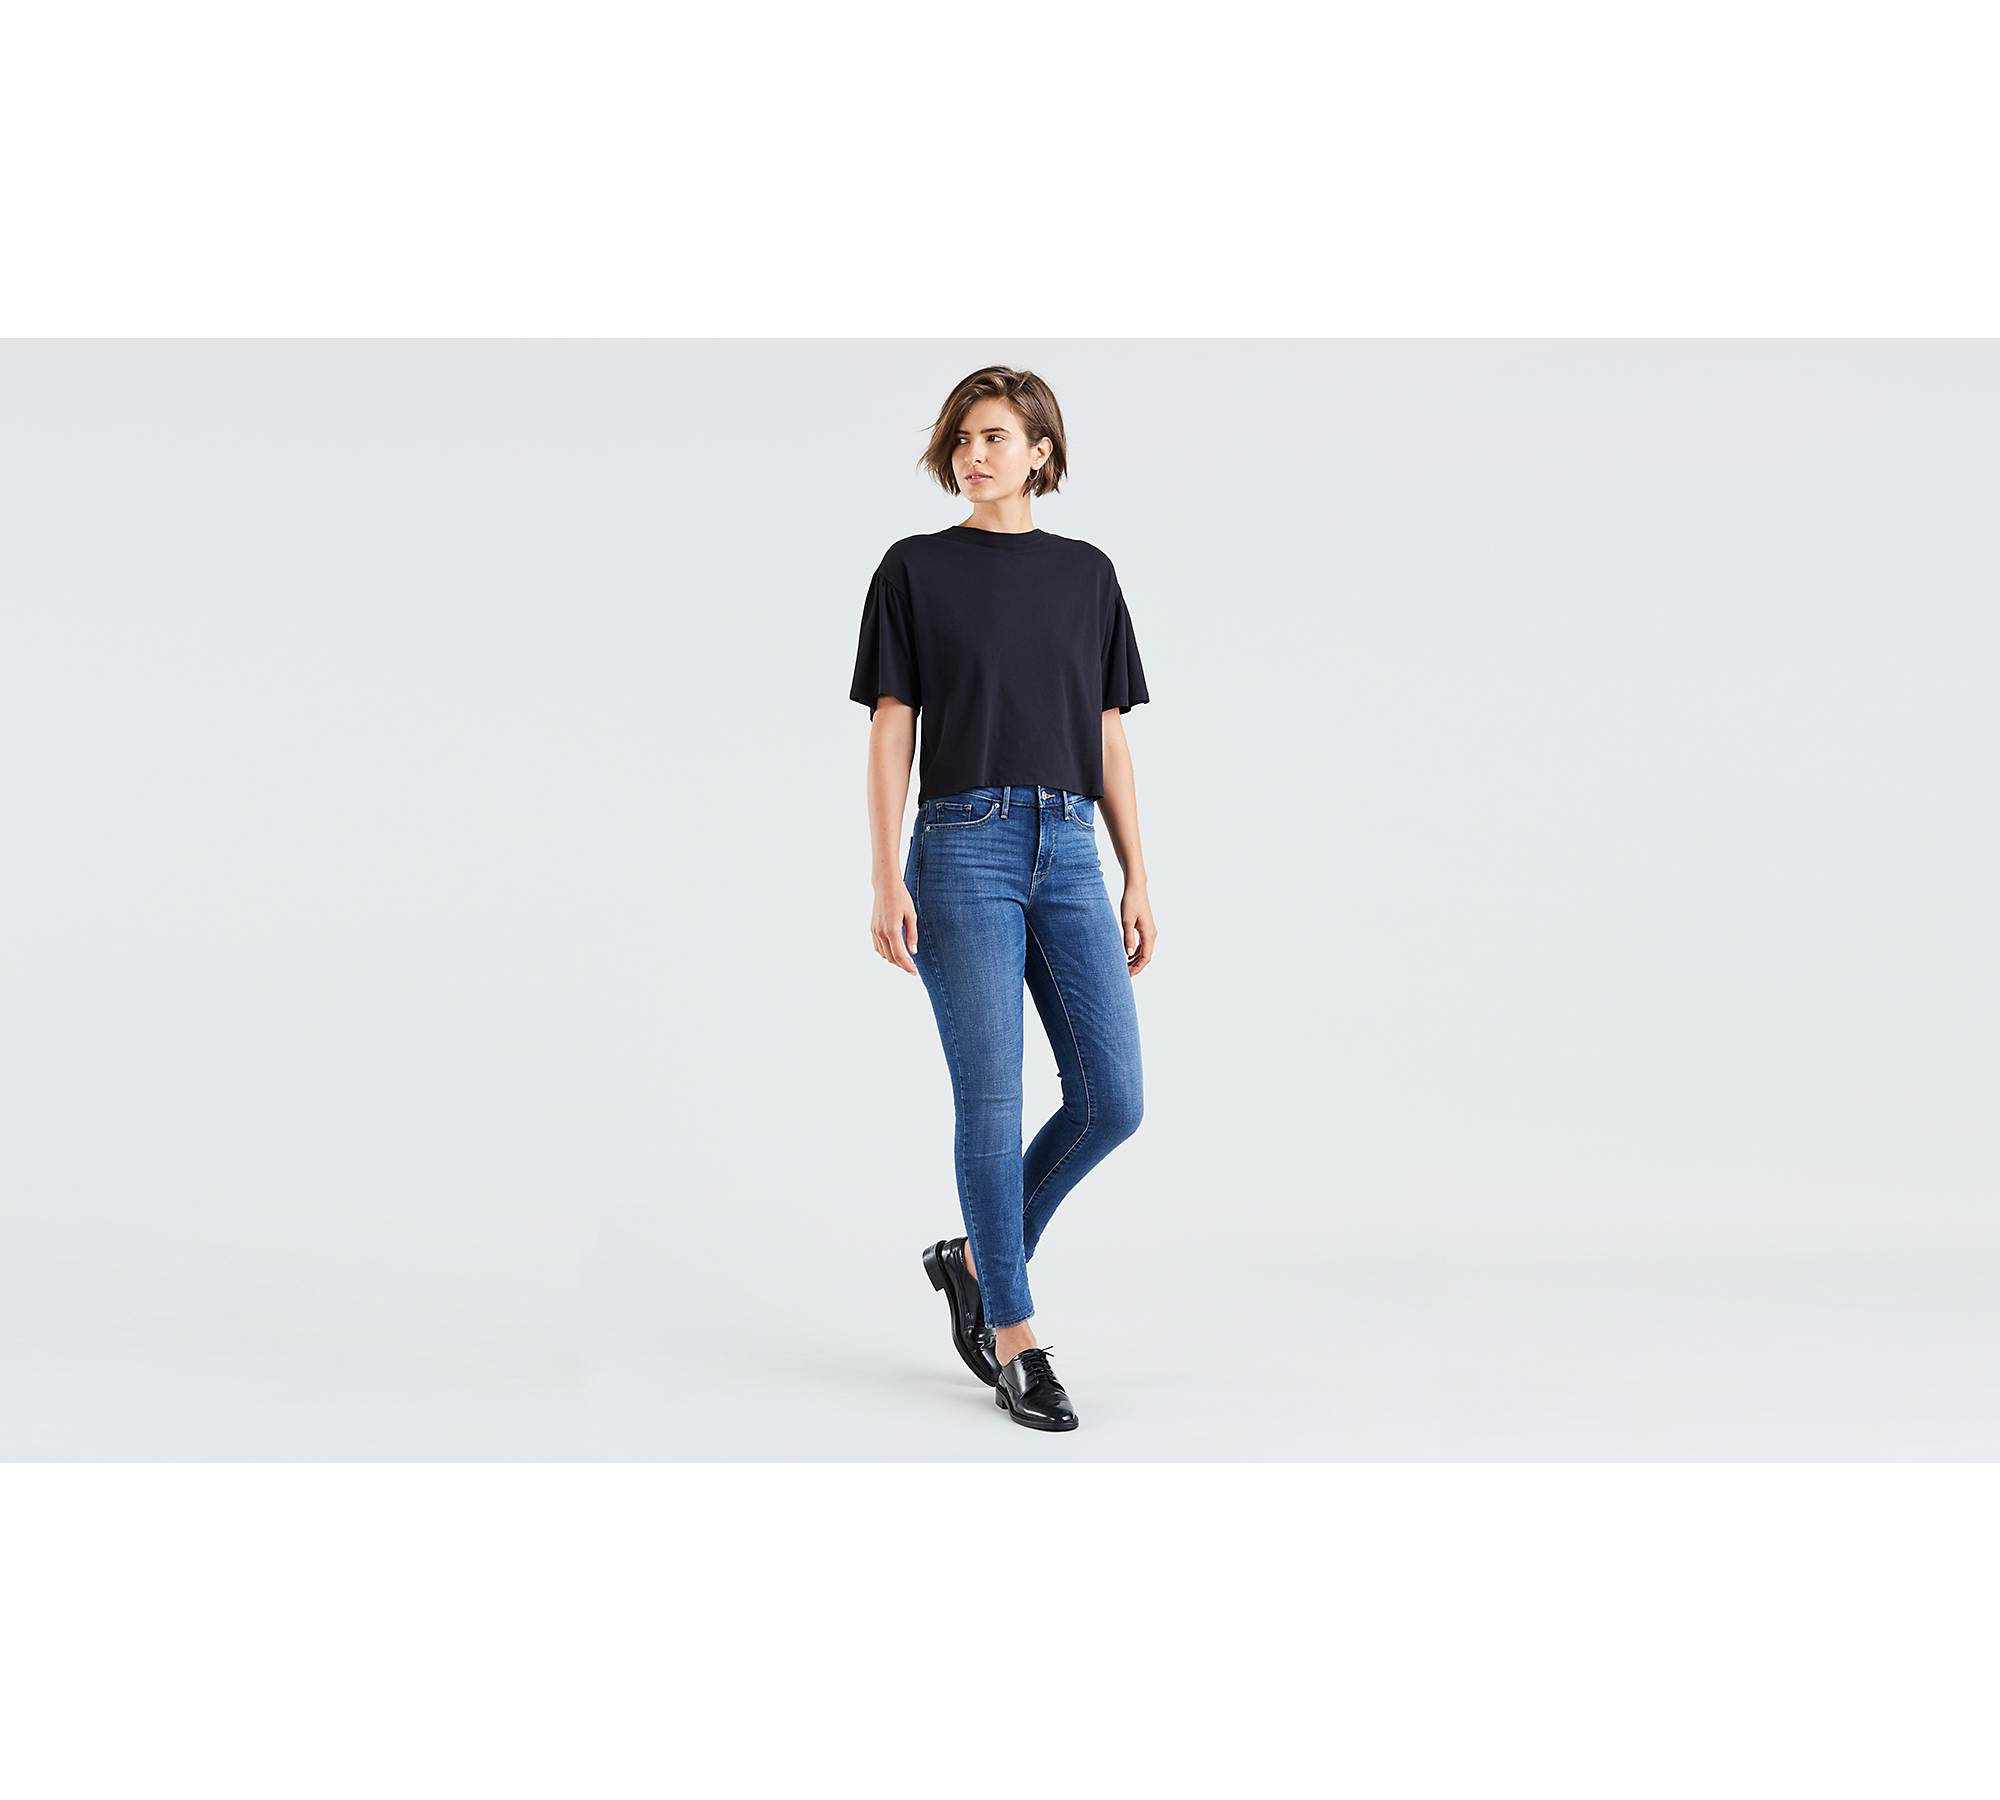 Women's Super Stretch 5 Pocket Jeans in Navy from Crew Clothing